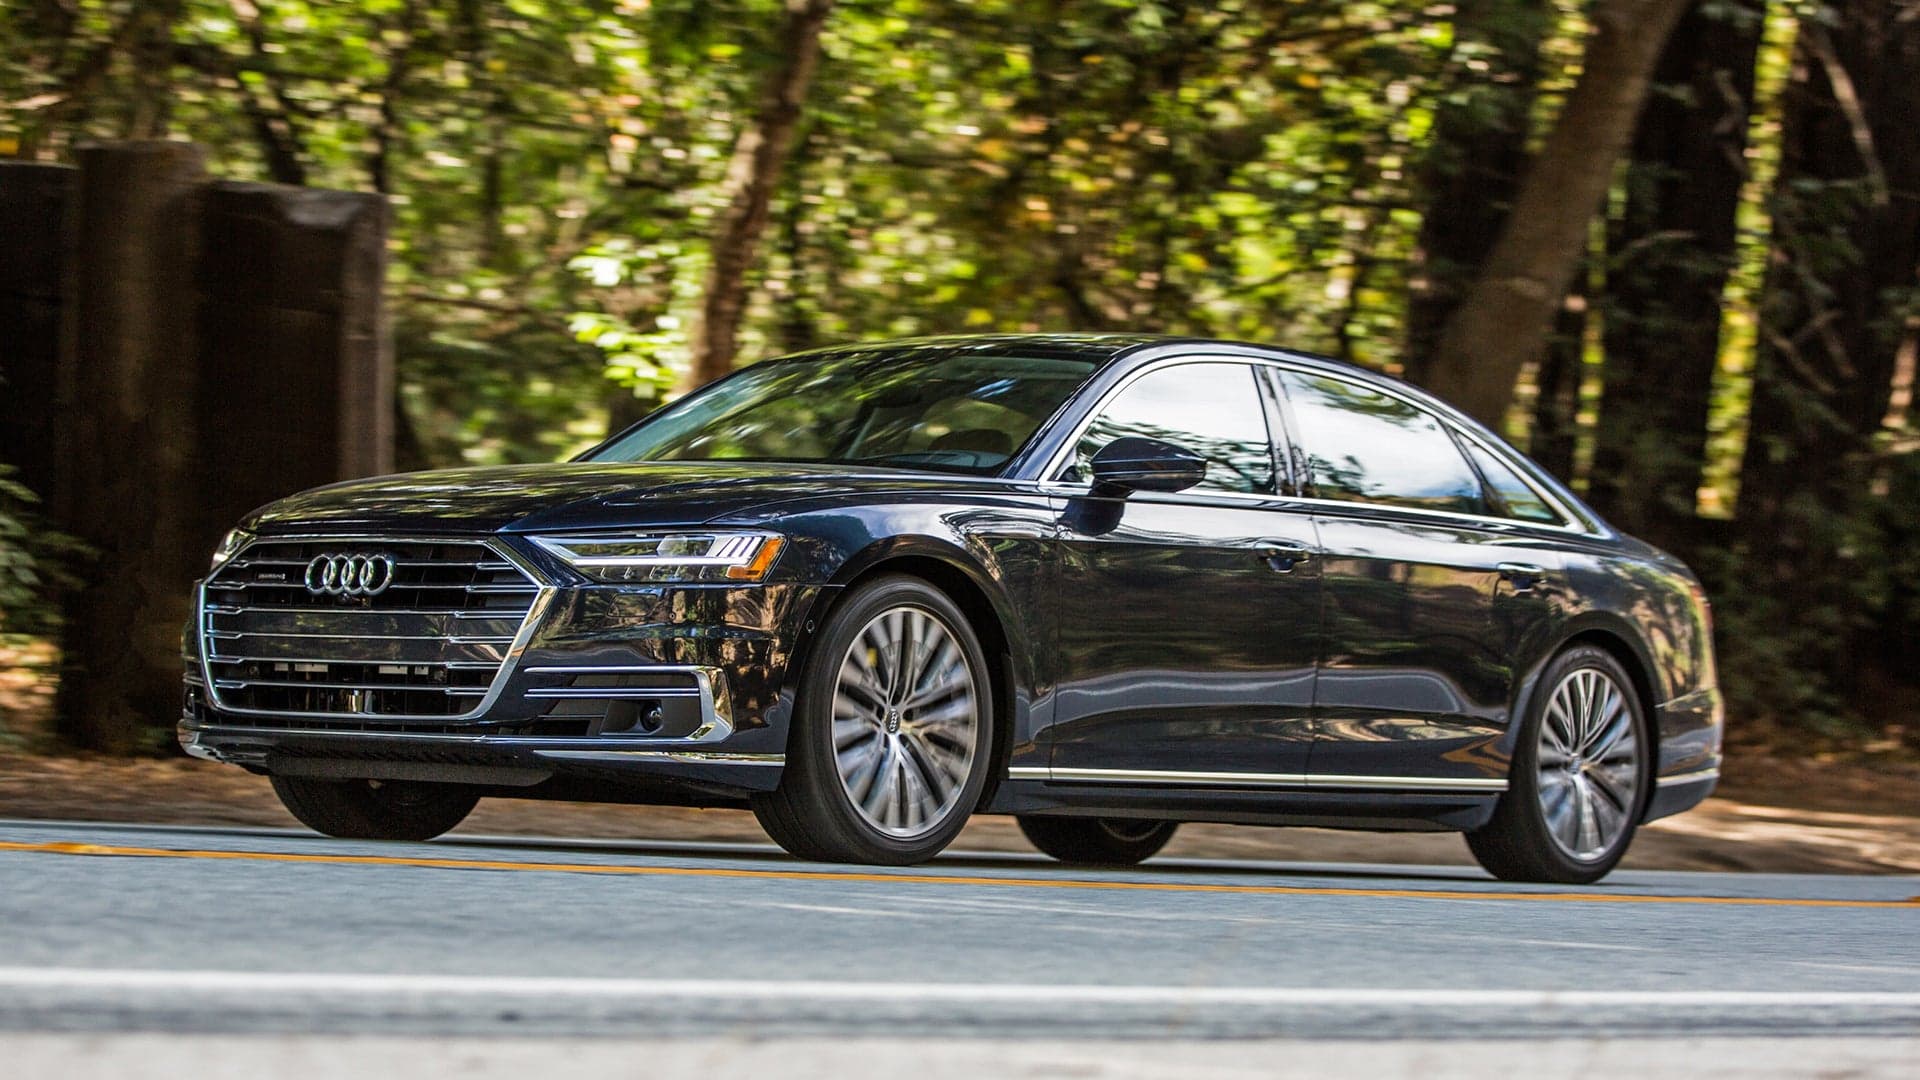 2019 Audi A8 Review: Tech-Packed Flagship Delivers Almost Everything, Except Level 3 Autonomy